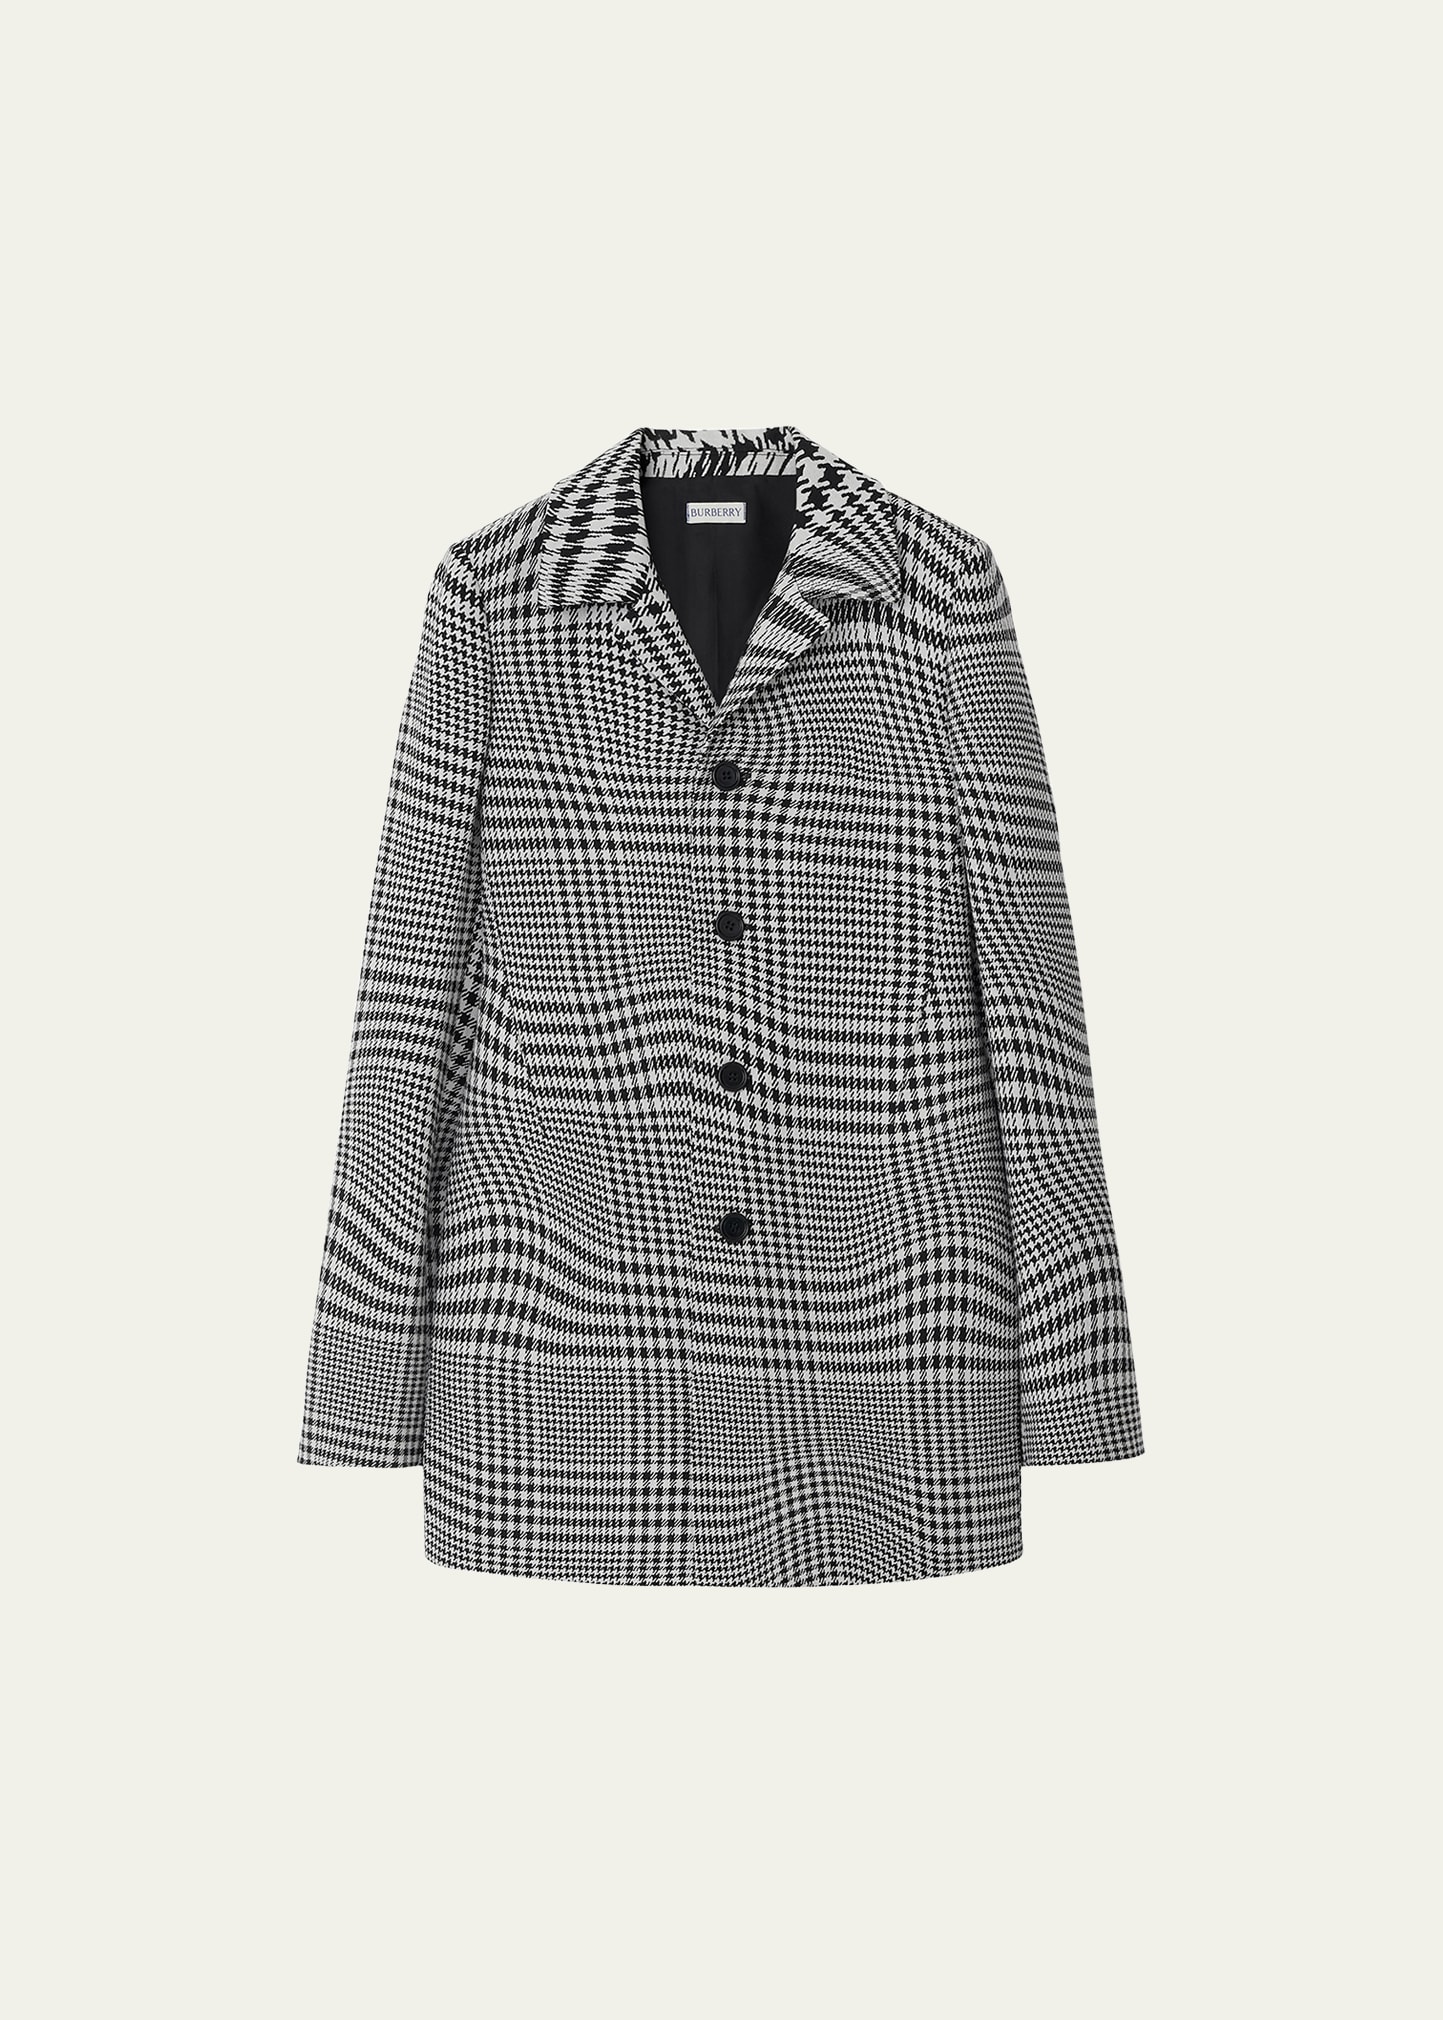 Burberry Prince of Wales Tailored Hourglass Jacket